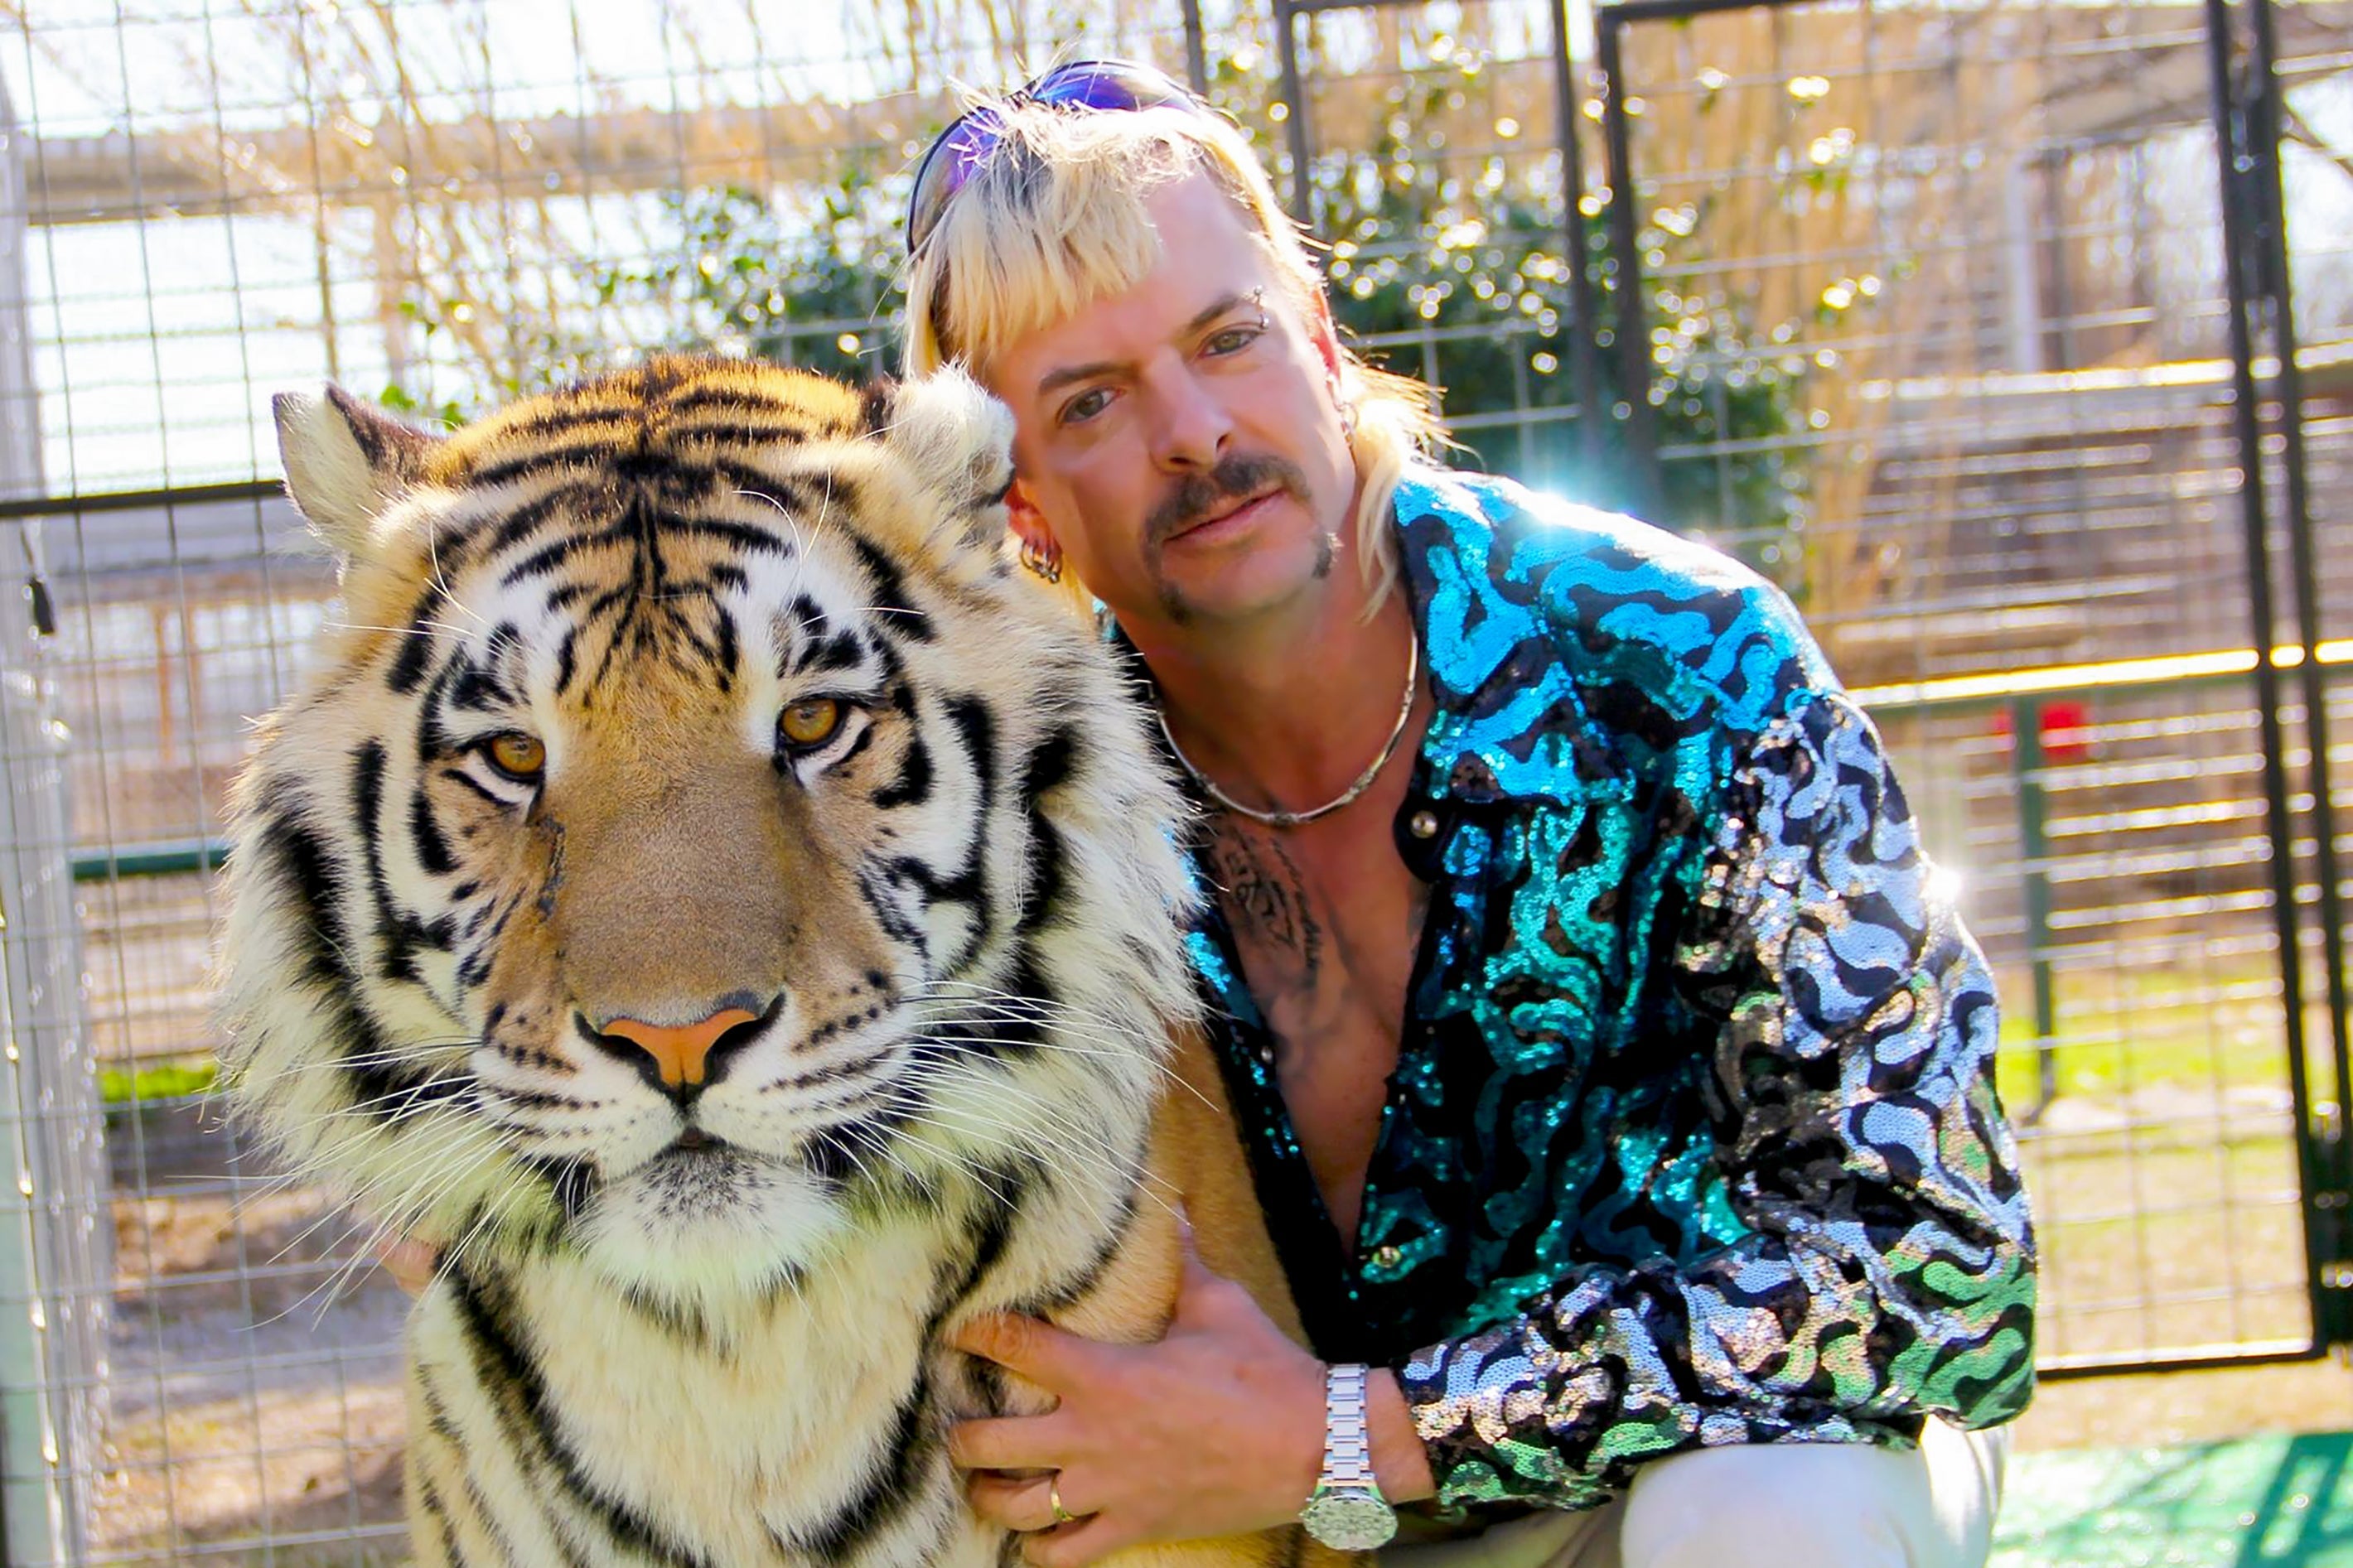 The Tiger King kneels with his arm around the tiger, his wearing a sparkly buttoned-down, tiger-print shirt, bleach-blonde hair, a handlebar mustache, and purple sunglasses up on his forehead. The tiger sits unfazed.